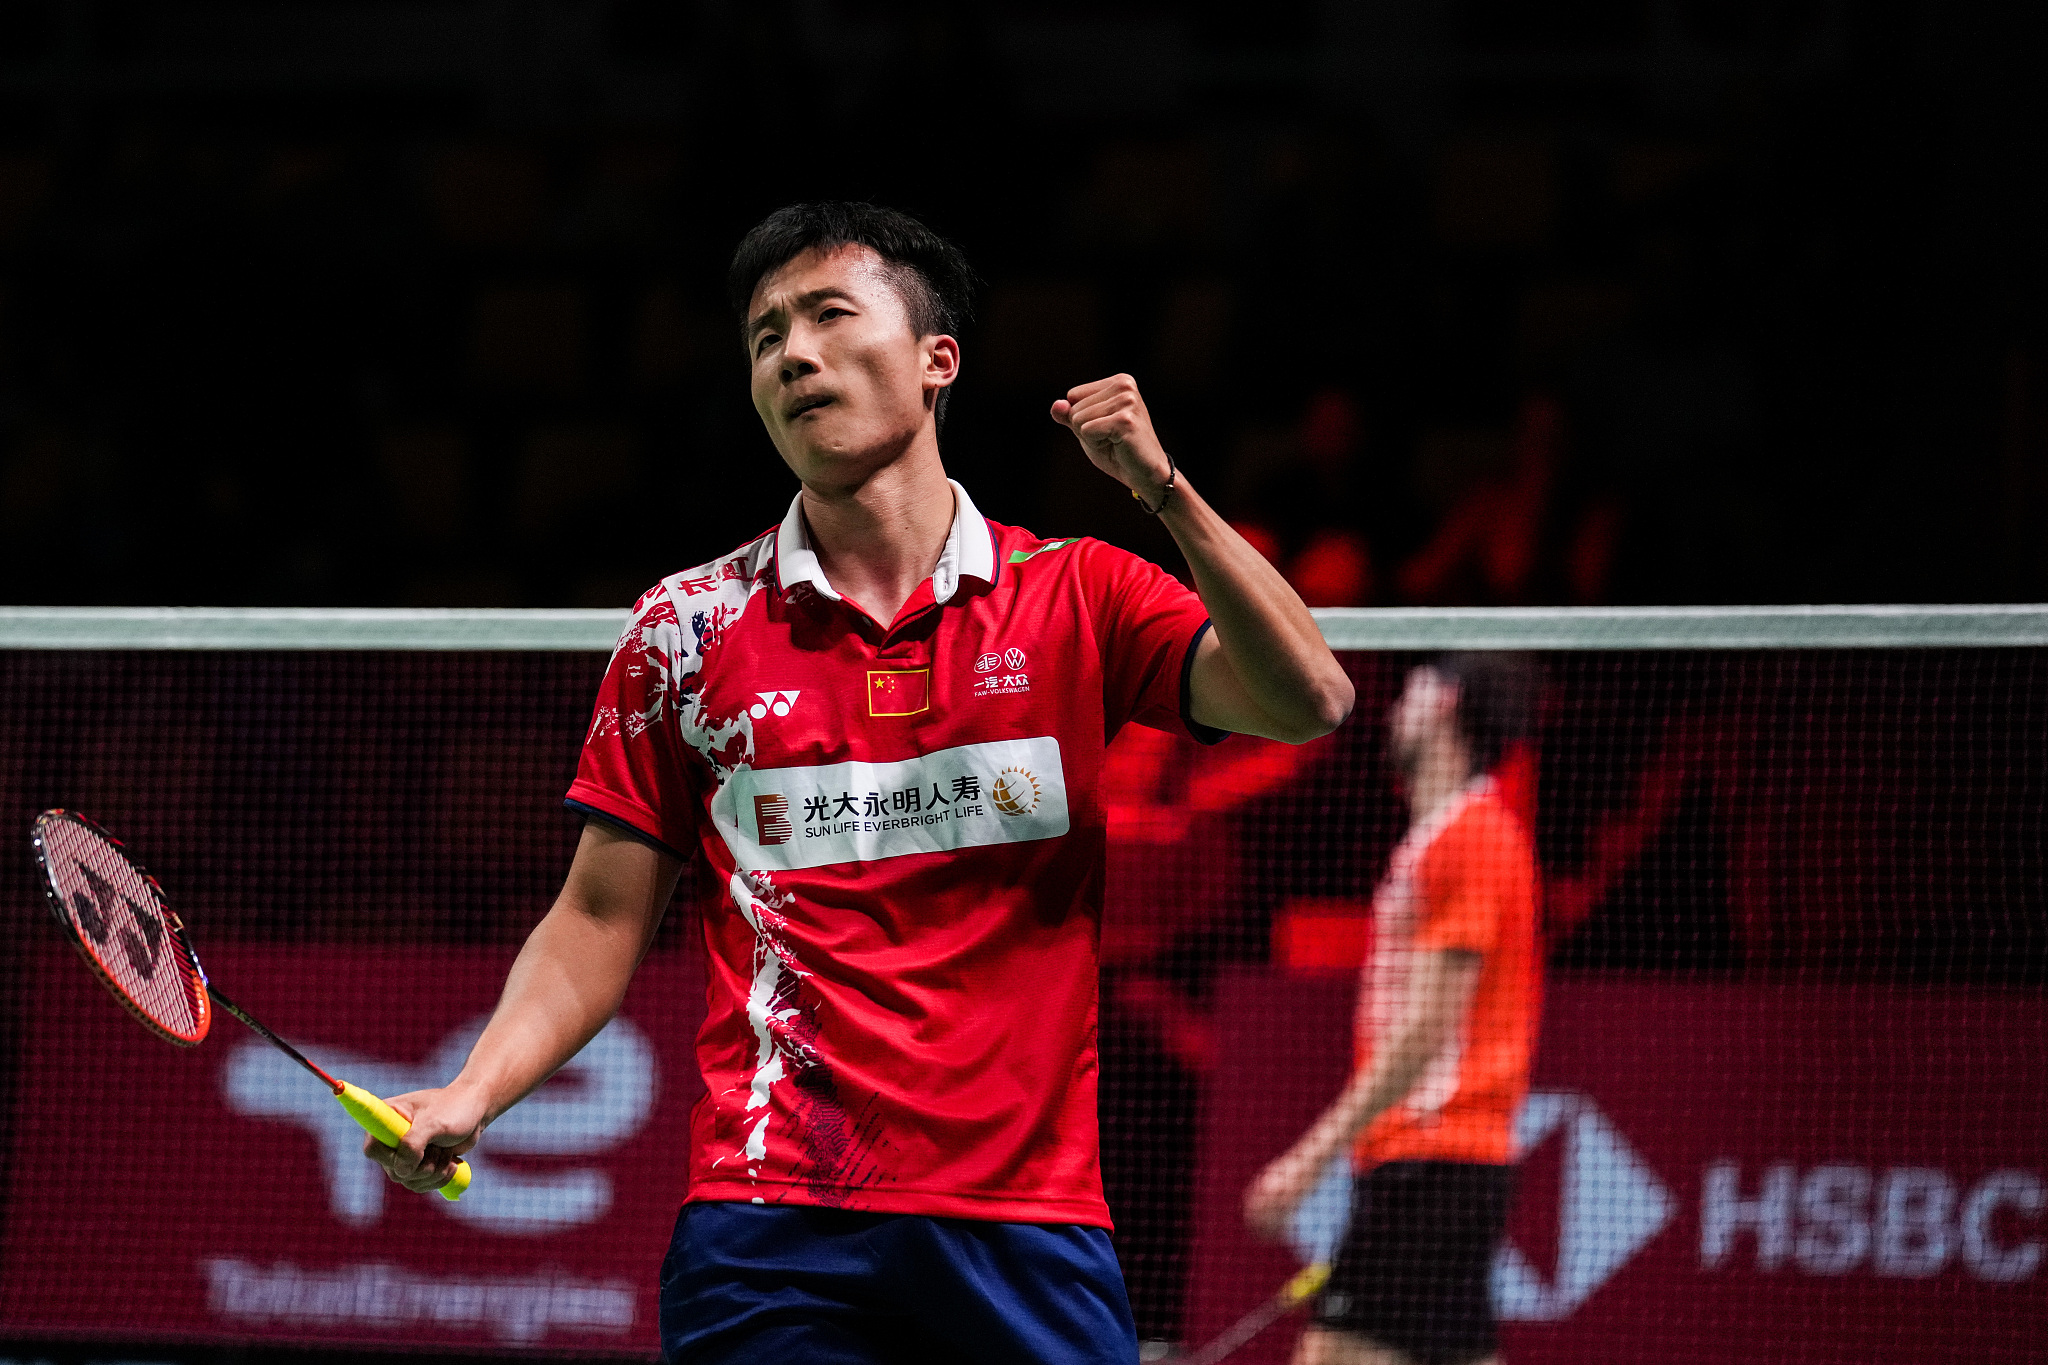 Thomas & uber cup 2021 results